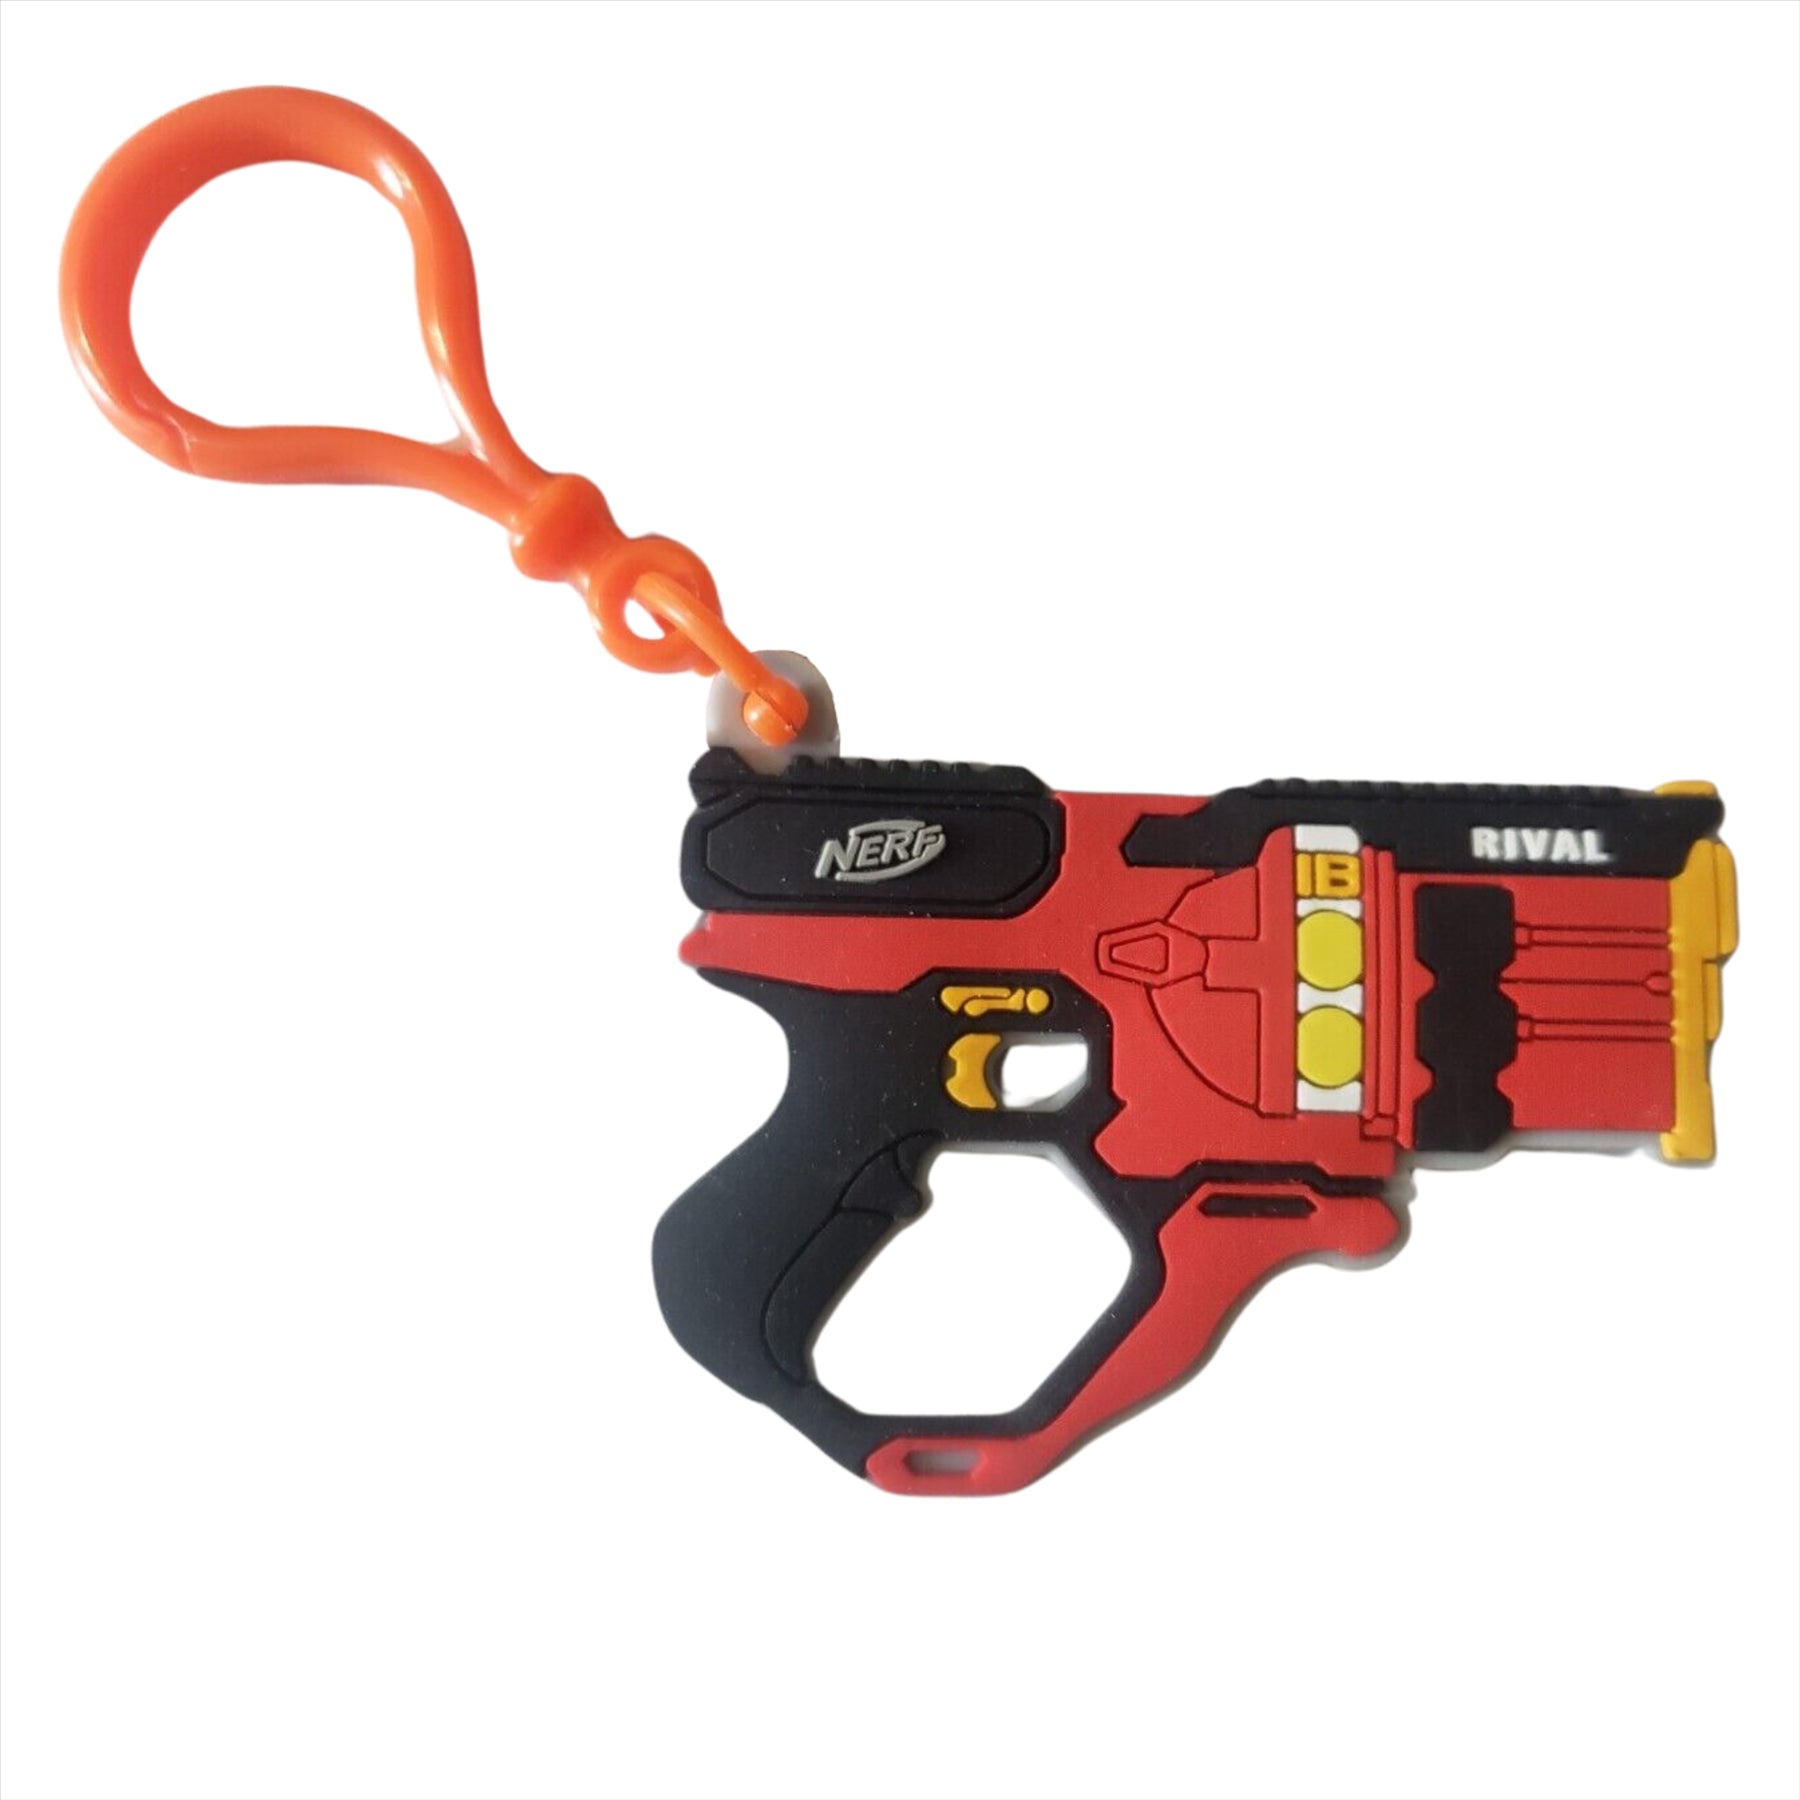 NERF - Blind Bag Party Favours Blaster Clip Keychain Charms - Pack of 8 - Toptoys2u